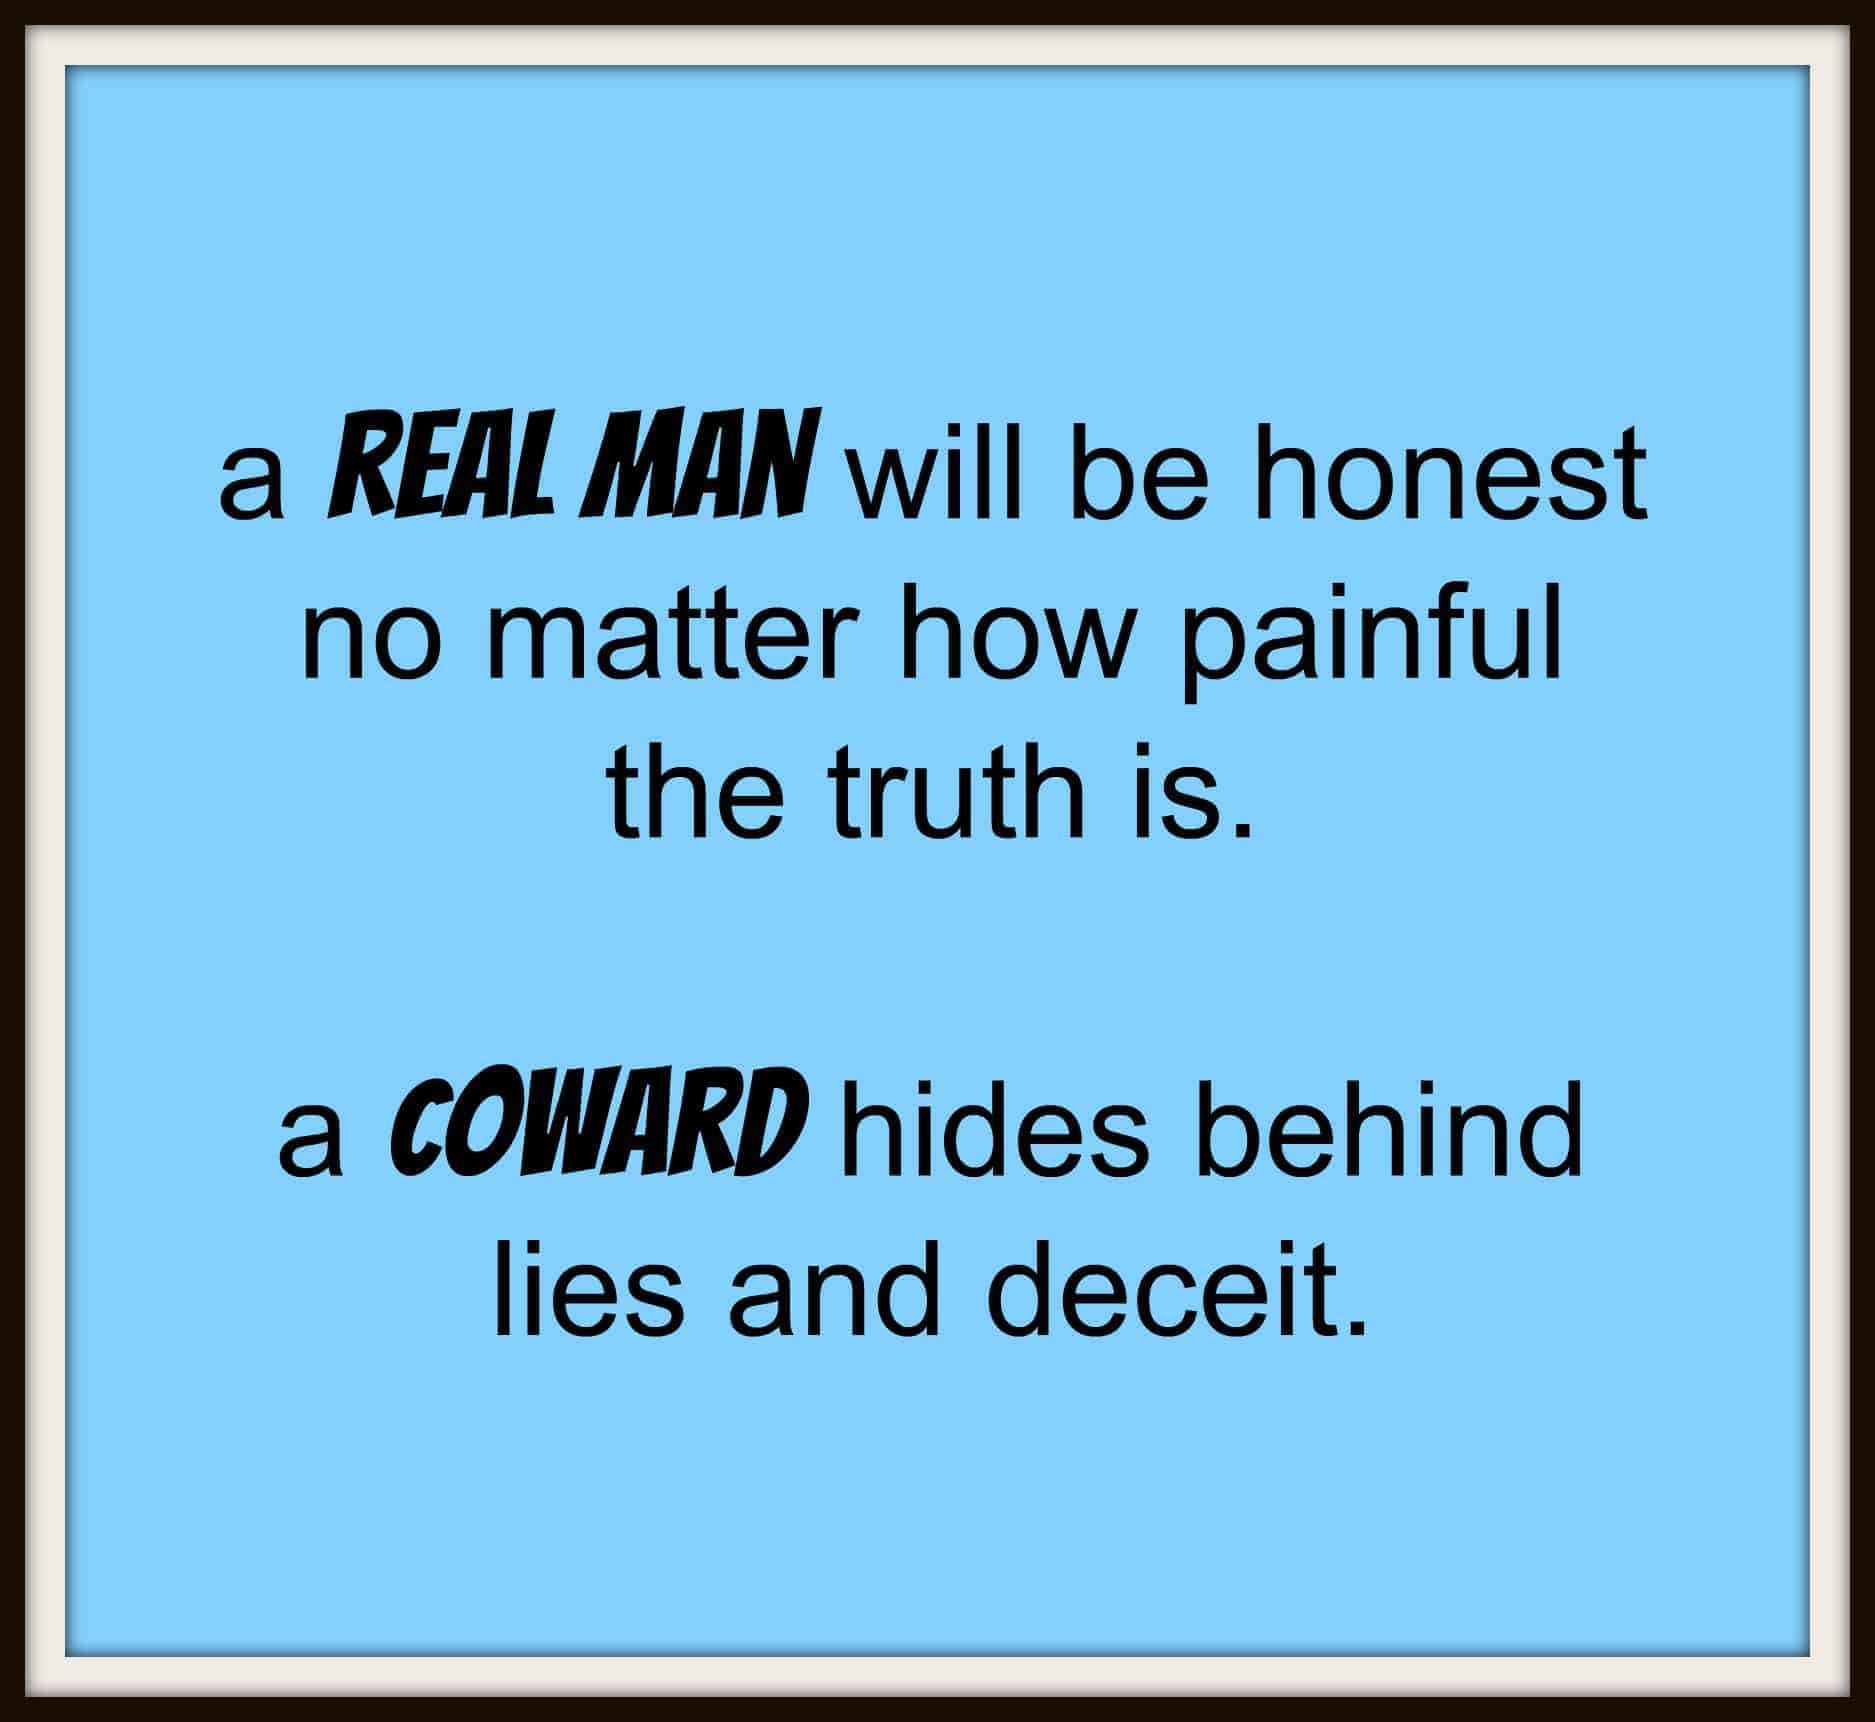 a real man will be honest no matter how painful the truth is, a coward hides behind lies and deceit.